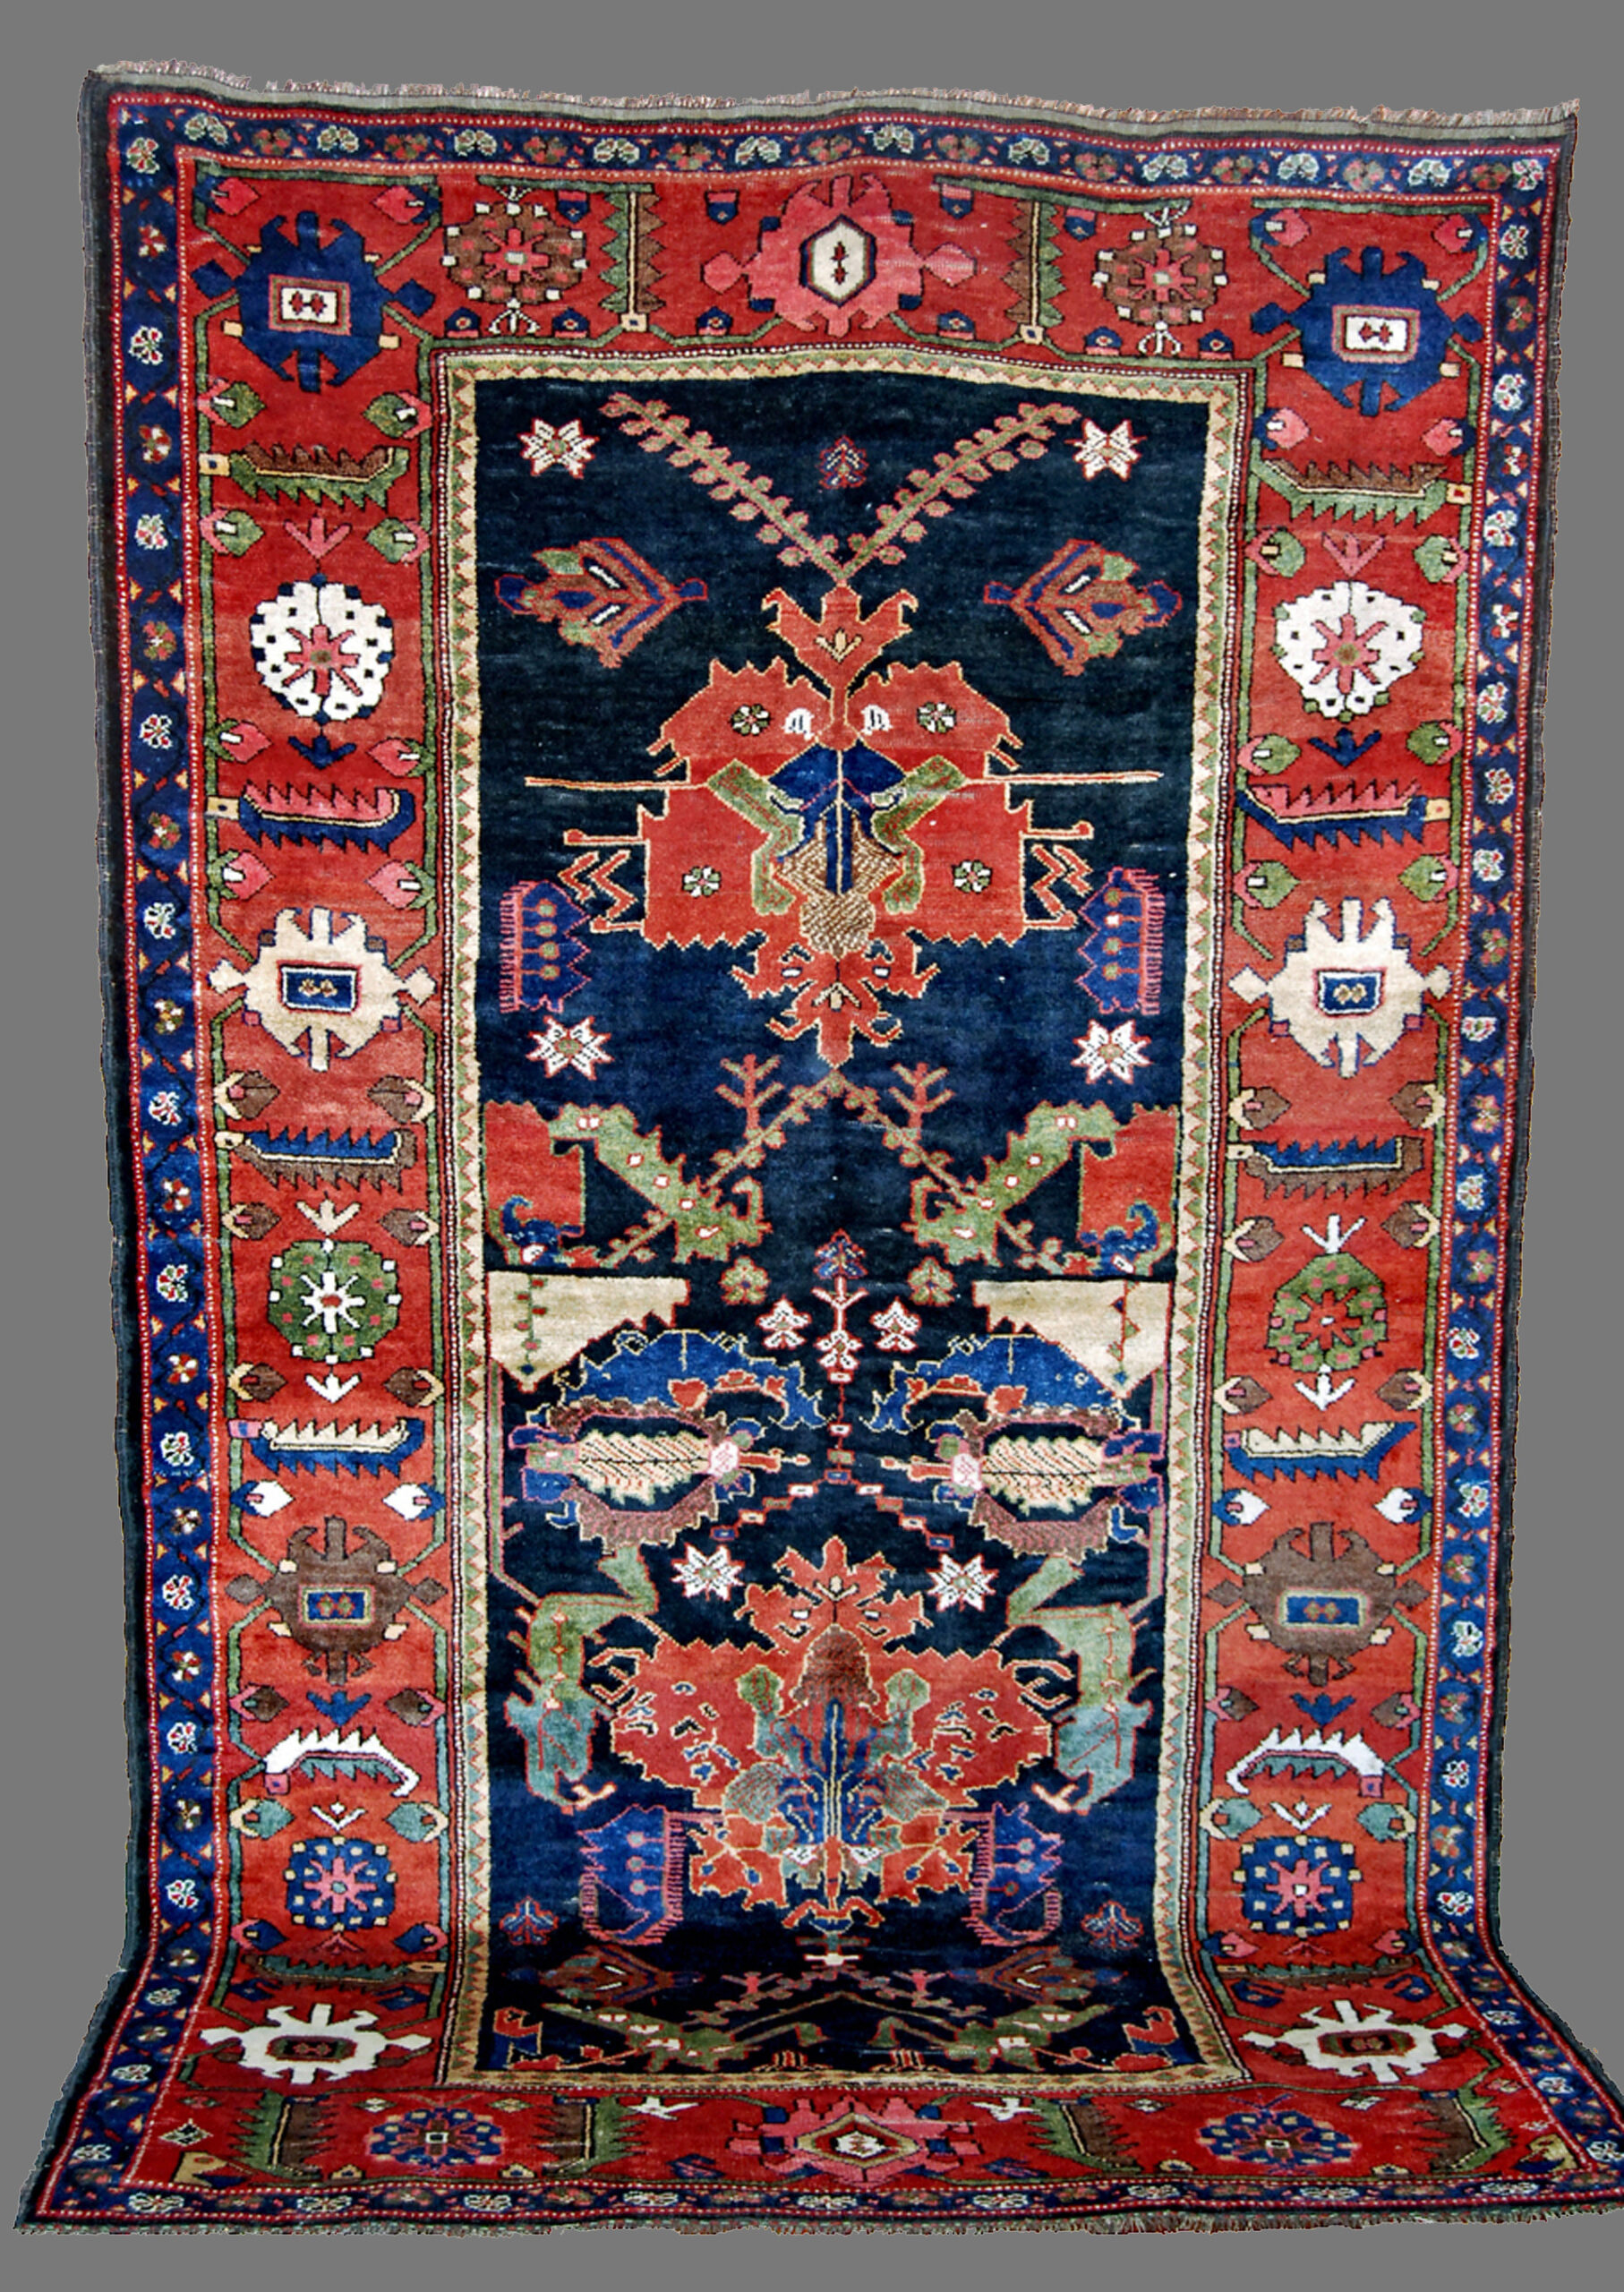 Antique south Persian Bakhtiyari rug with a Caucasian Dragon Carpet related design on a navy blue field with a brick red border